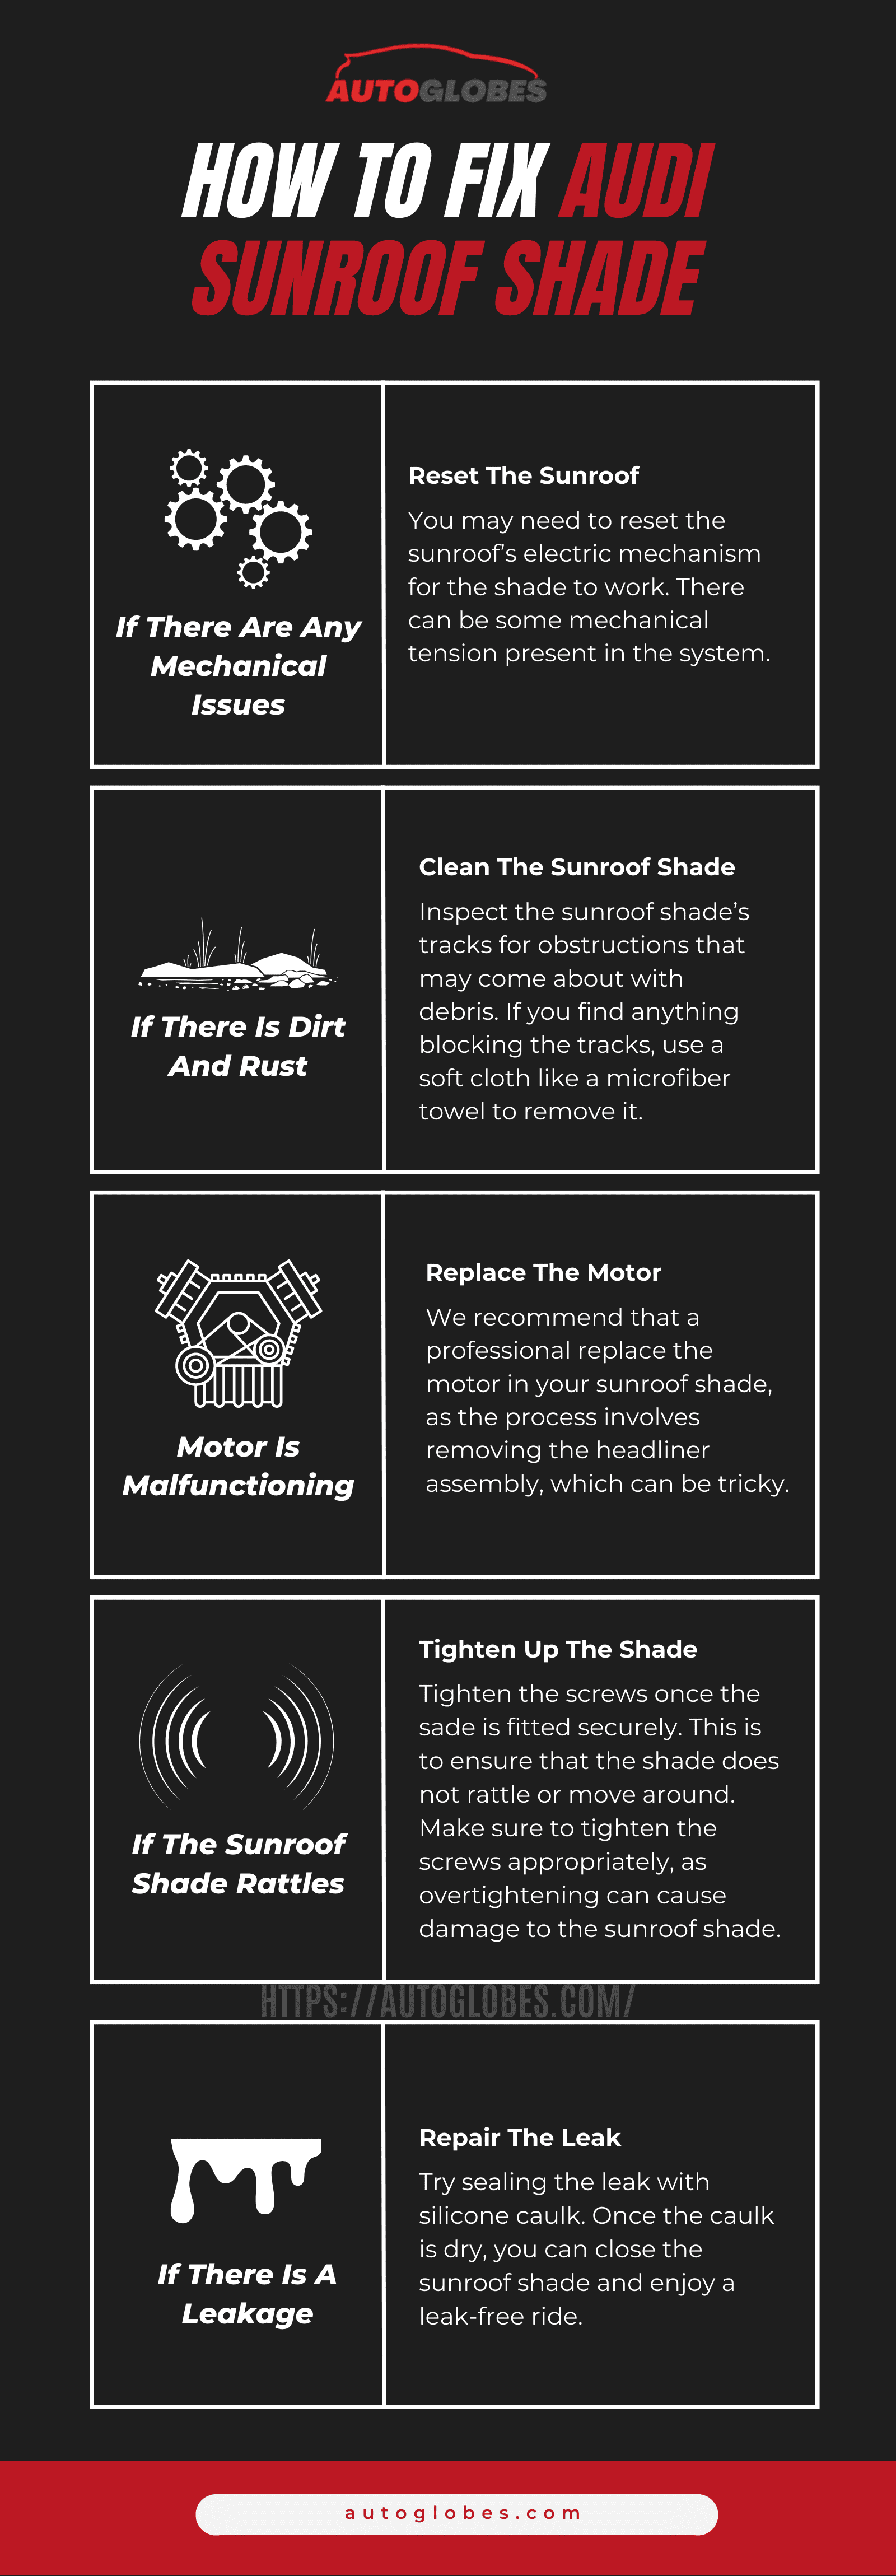 How To Fix Audi Sunroof Shade 5 Steps Infographic